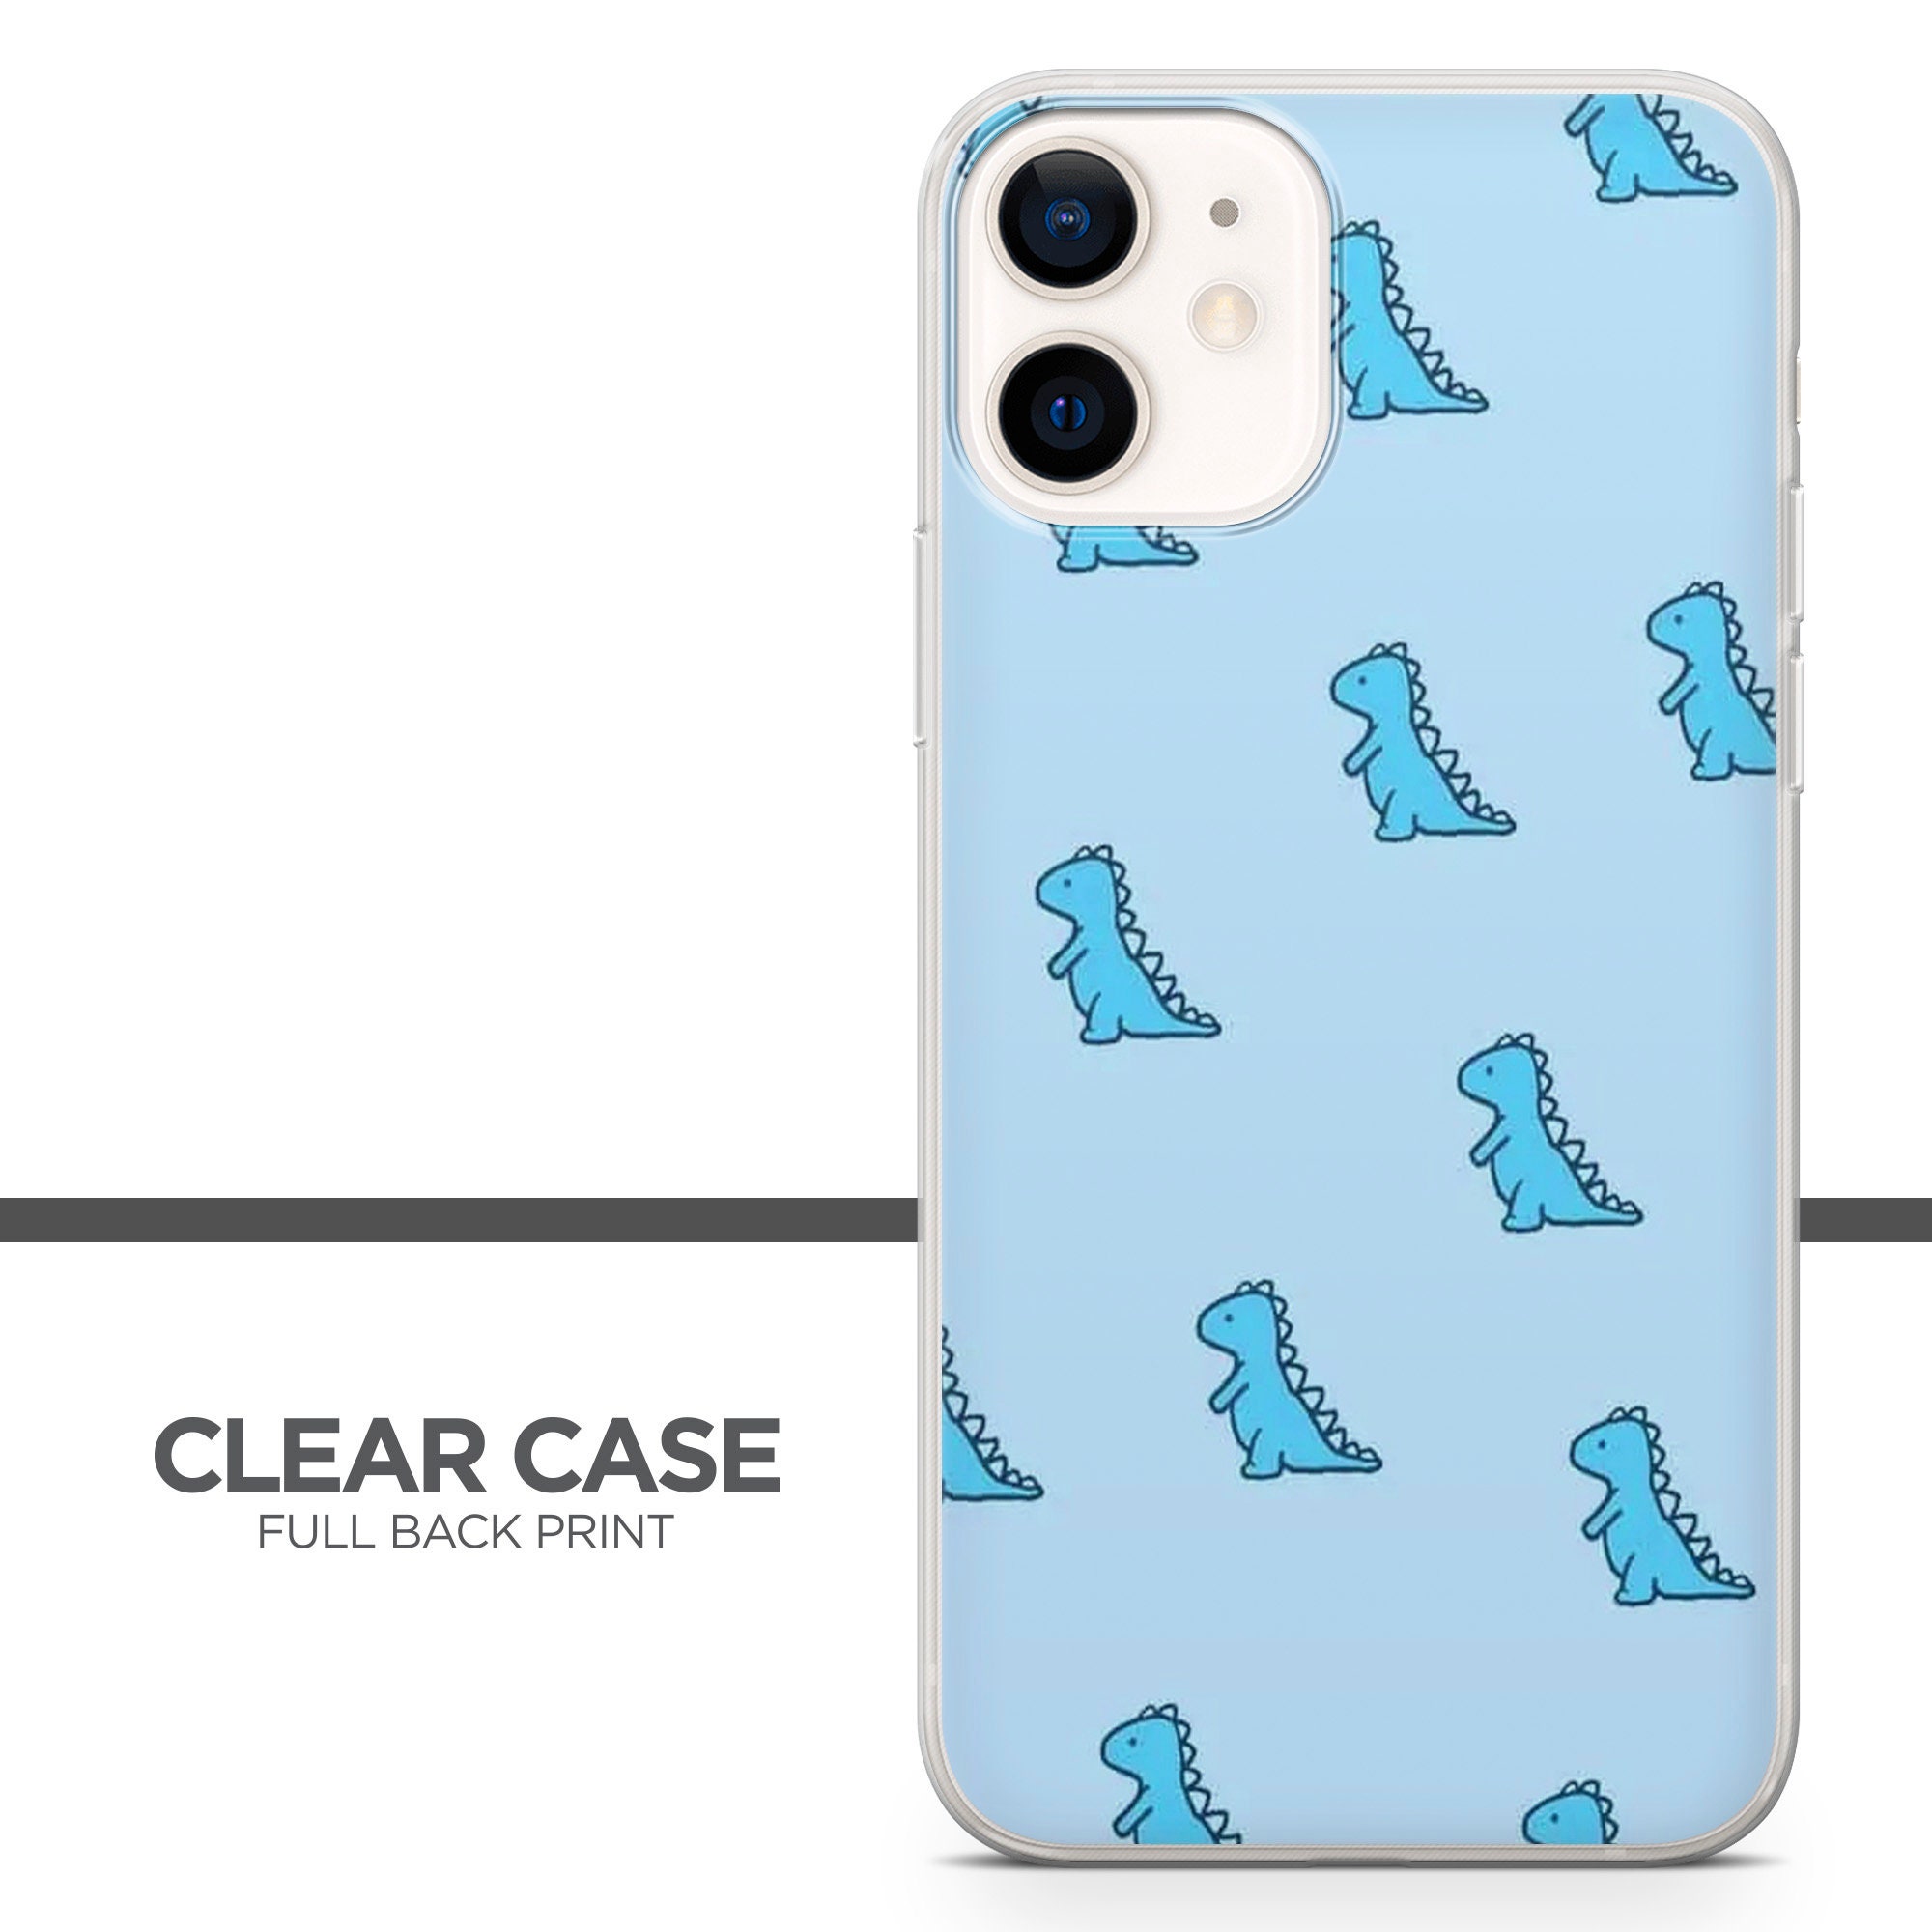 Athvotar Dinosaur Phone Cases for iPhone 12 11 Pro Max Soft Tpu